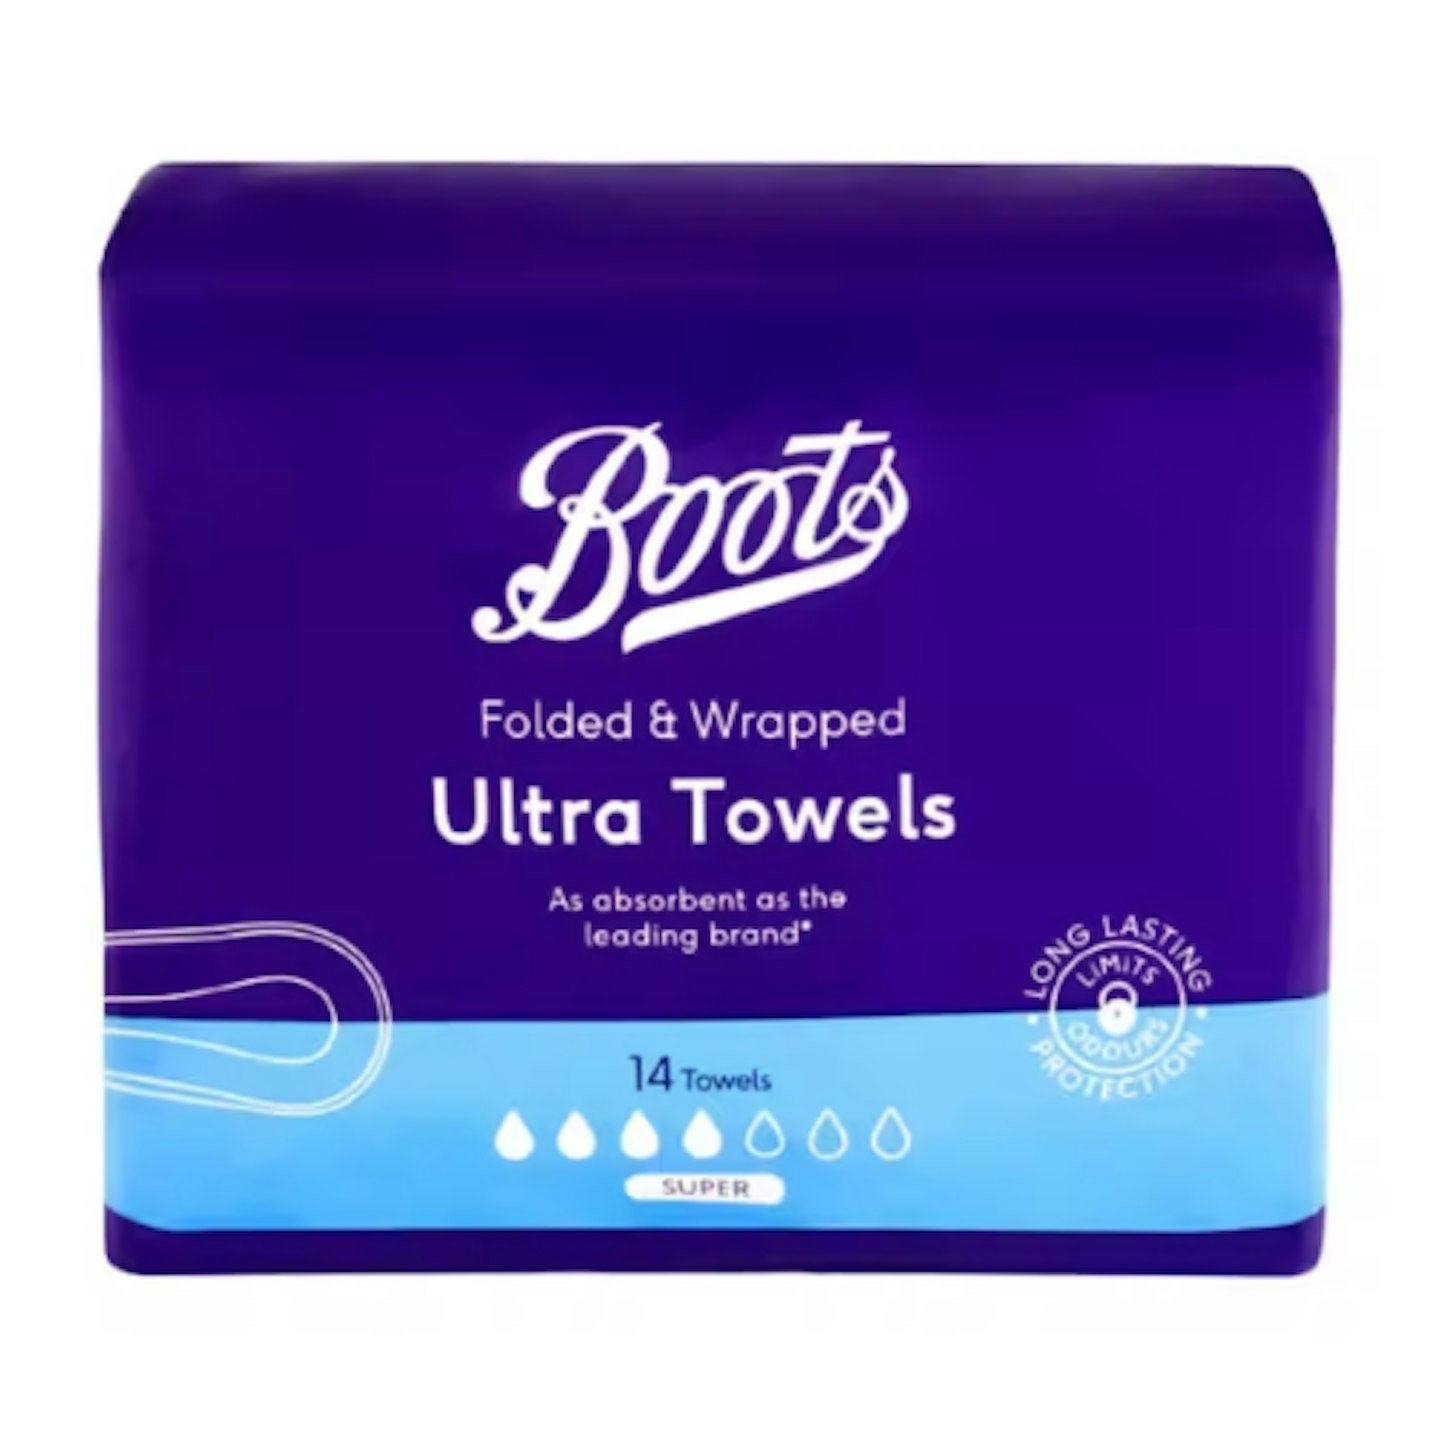 Boots everyday ultra towels super 14s